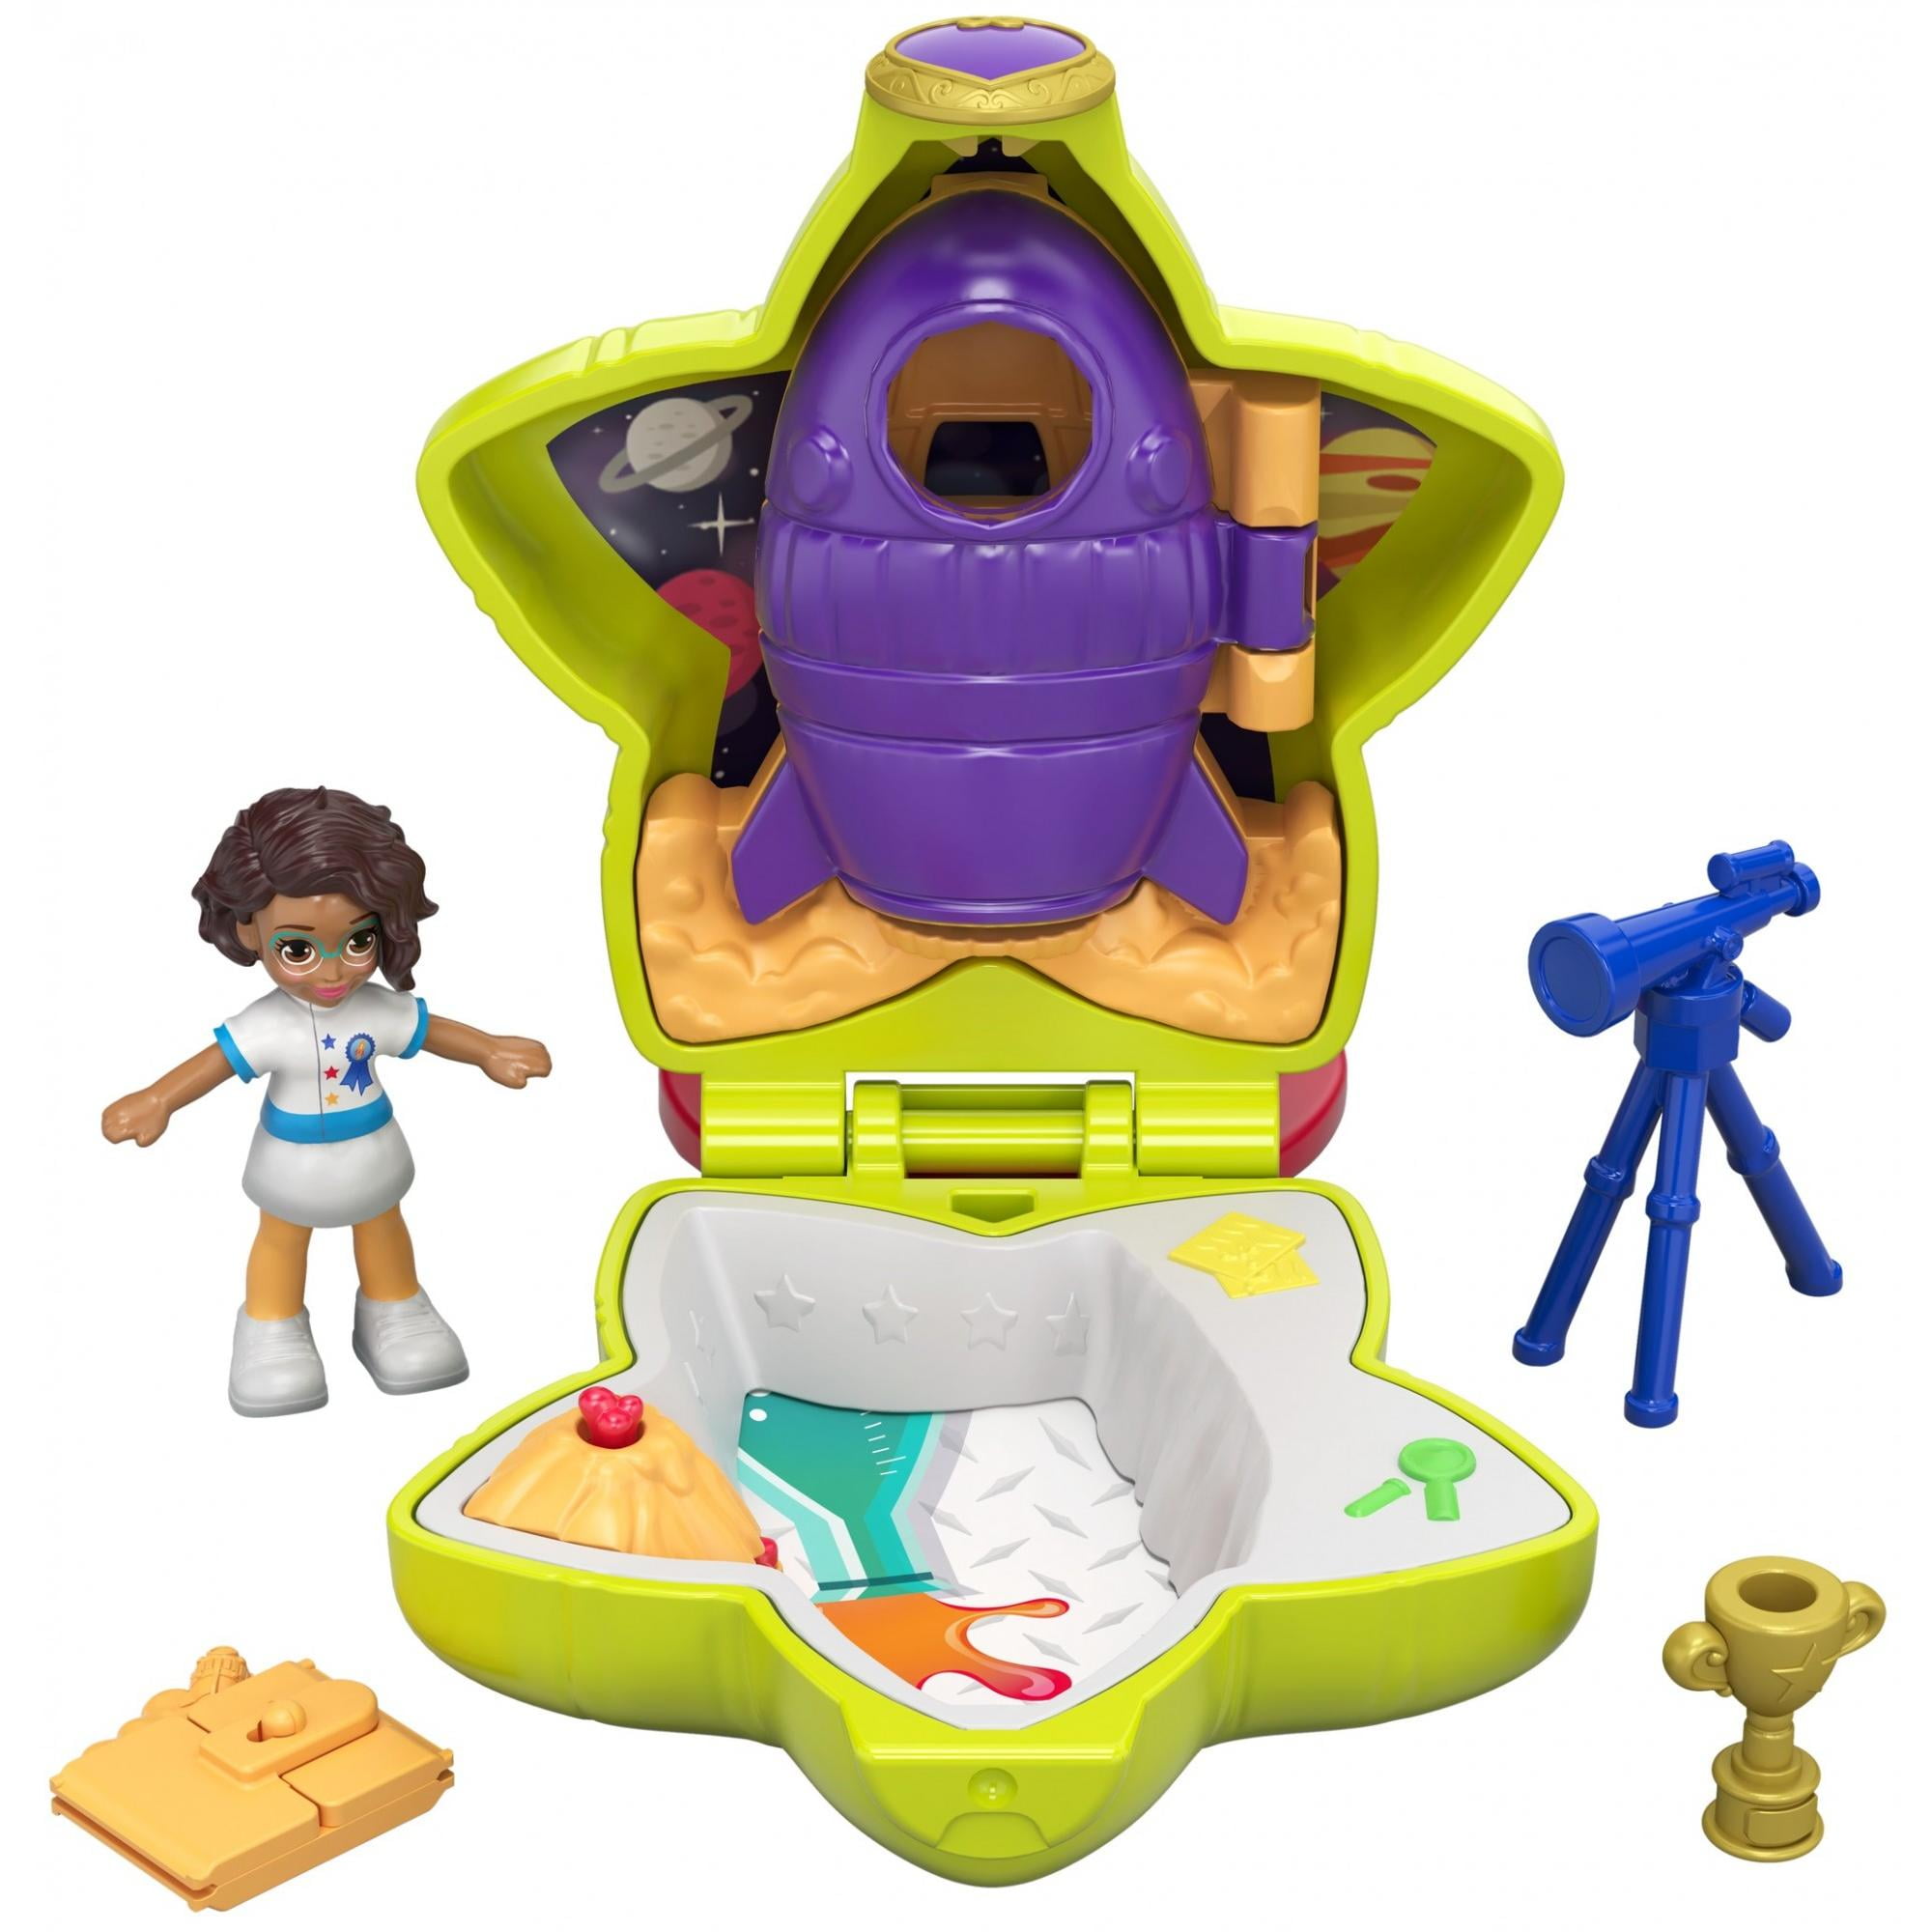 Details about   Polly Pocket Tiny Pocket Places Picnic Compact Polly Stick Dog & Scooter NEW